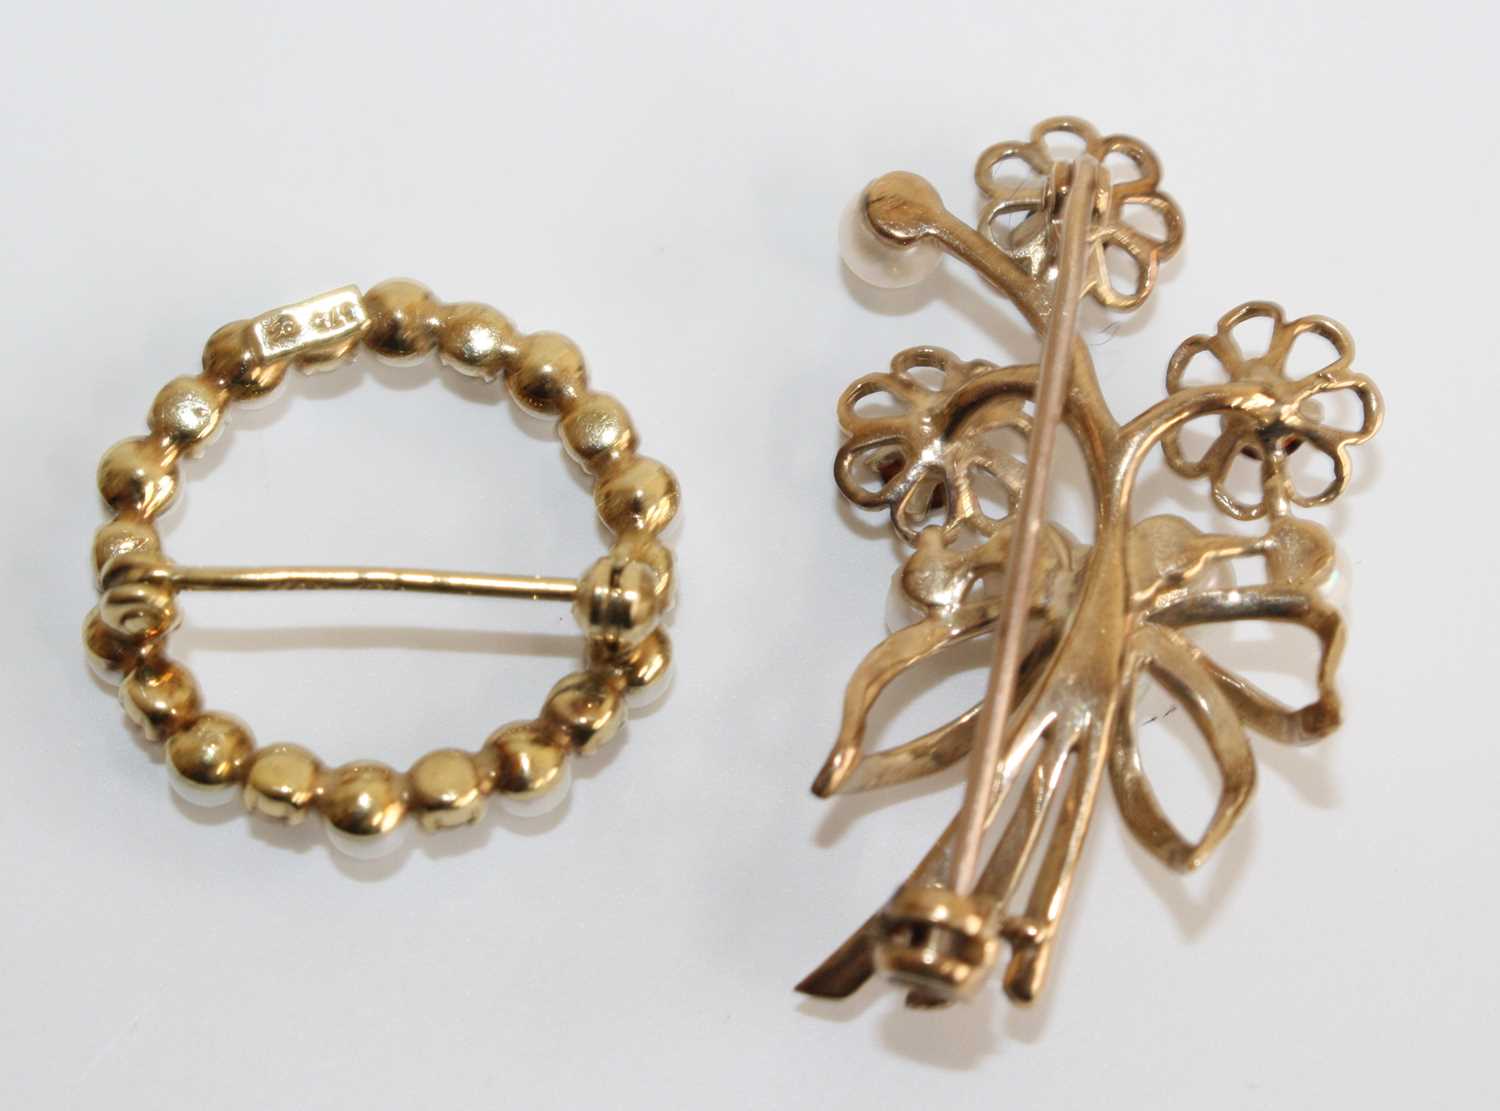 Two 9ct yellow gold, garnet and cultured pearl brooches, one designed as a floral spray with three - Image 2 of 2